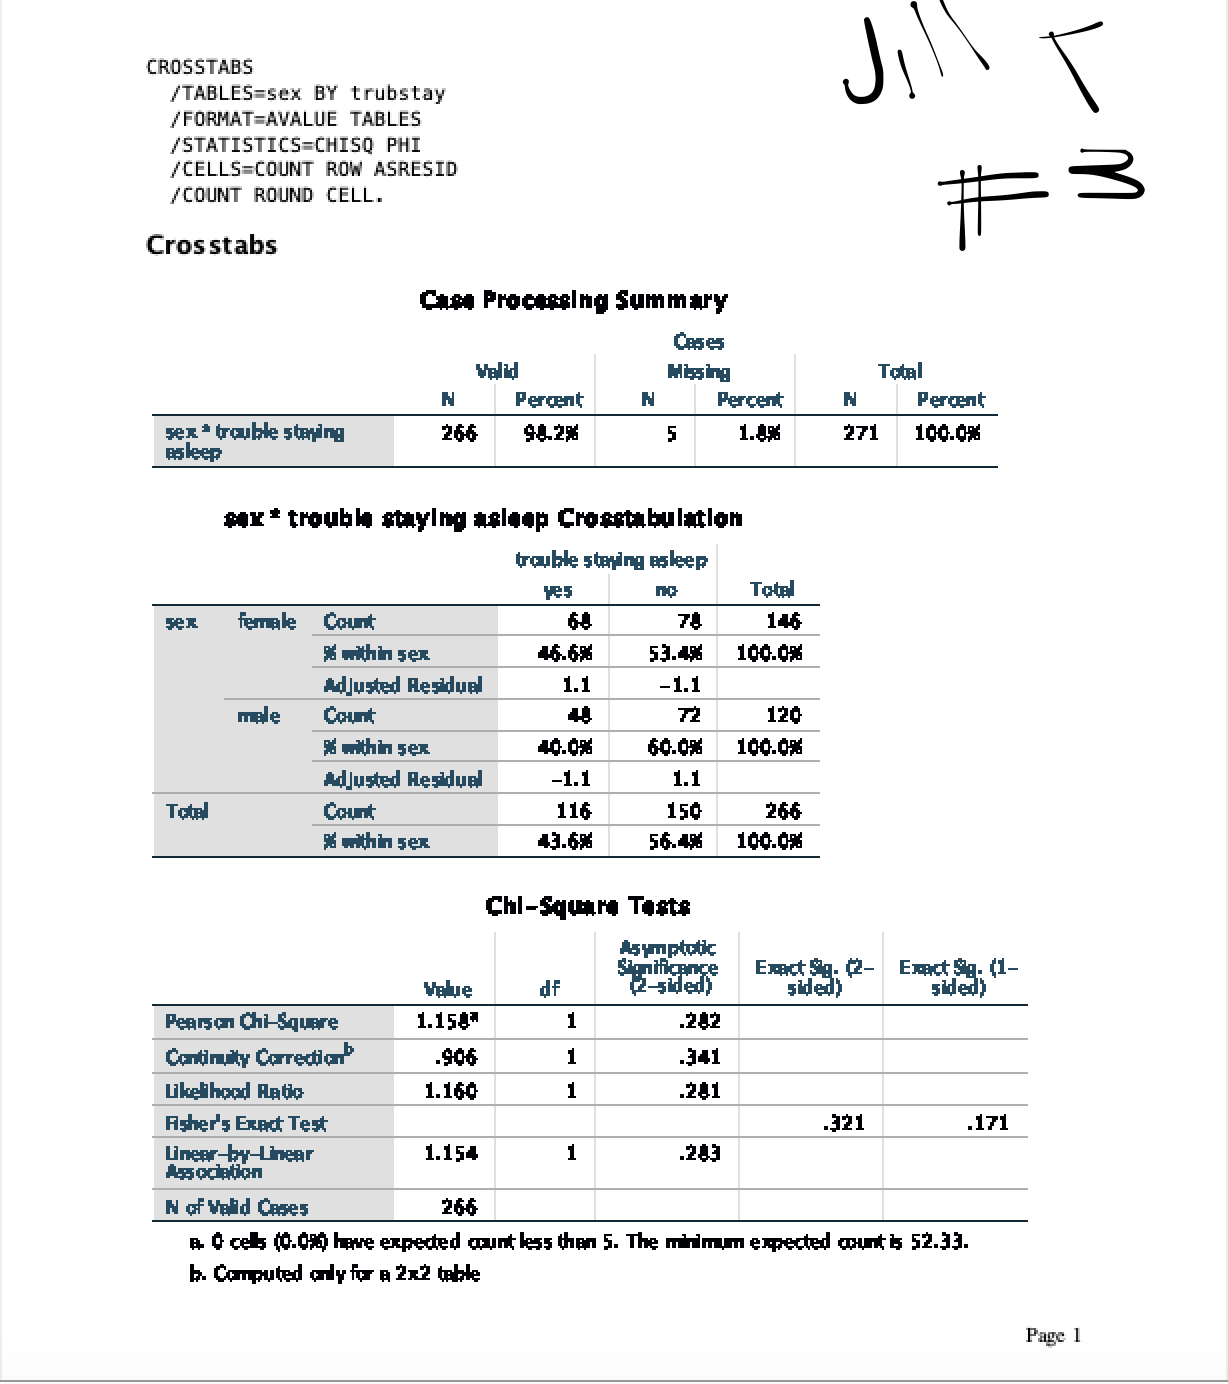 Jill I
CROSSTABS
/TABLES=sex BY trubstay
/FORMAT=AVALUE TABLES
/STATISTICS=CHISQ PHI
/CELLS=COUNT ROW ASRESID
/COUNT ROUND CELL.
Crosstabs
Case Processing Summary
Ceses
Velid
Missing
Total
Percent
Рeгcent
Percent
sex* trauble steing
esleep
266
98.2%
1.8%
271
100.0%
sax* trouble stayIng asleep Crosstabulation
trauble steing esleep
yes
п
Totel
sex
female
Count
68
78
146
몇thin sex
46.6%
53.4%
100.0%
Adjusted Residuel
1.1
-1.1
male
Count
72
120
몇thin sex
40.0%
60.0%
100.0%
Adjusted Residuel
-1.1
1.1
Total
Сене
116
150
266
* within sex
43.6%
56.4%
100.0%
Chl-Square Tests
Asymptotic
Sntfigance
오-sded)
Exect Sg. 2- Exect Sg. (1-
sided)
Velue
df
sided)
Pearson Chi-Squere
1.154"
.282
Contimity Carredtiat
.906
.341
Likelihood Ratio
1.160
.281
Aşher's Exact Test
321
.171
.283
Lineer-by-Linear
Asocation
1.154
Nof Velid Cases
266
A0 cells (0.00 heve expected aunt less then 5. The minim,m expected count is 52.33.
b. Computed oly for a 2x2 table
Page 1
